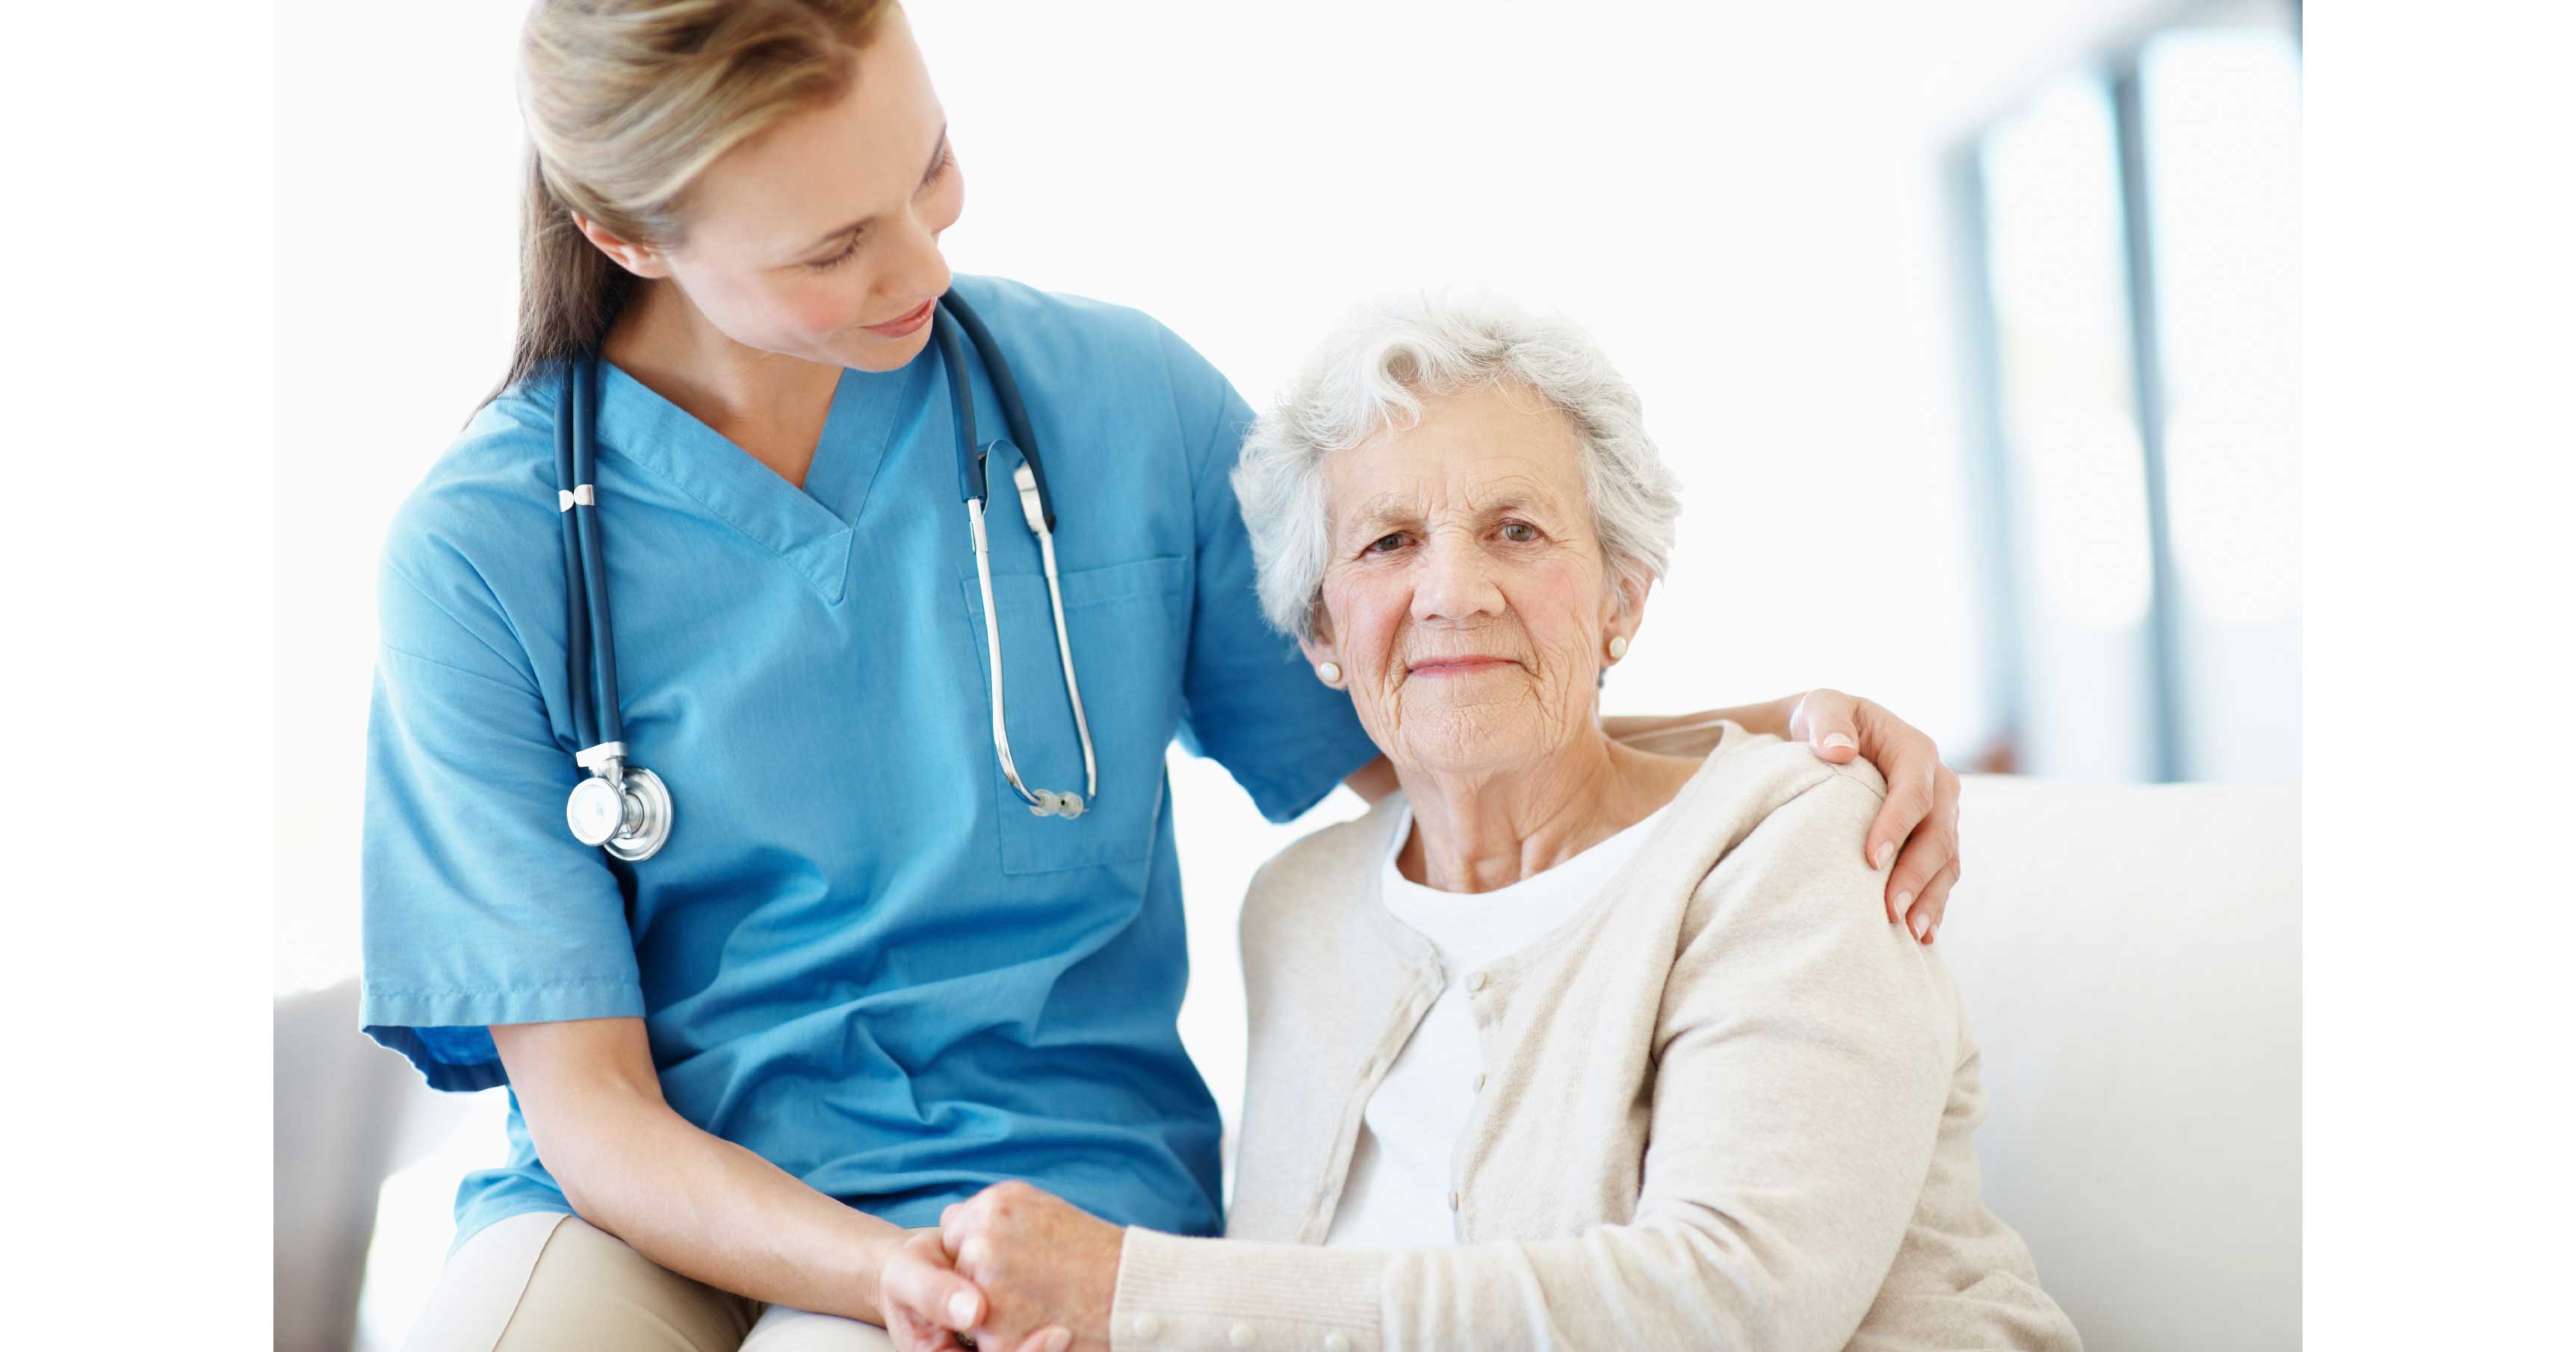 What Services Do Assisted Living Communities Provide?